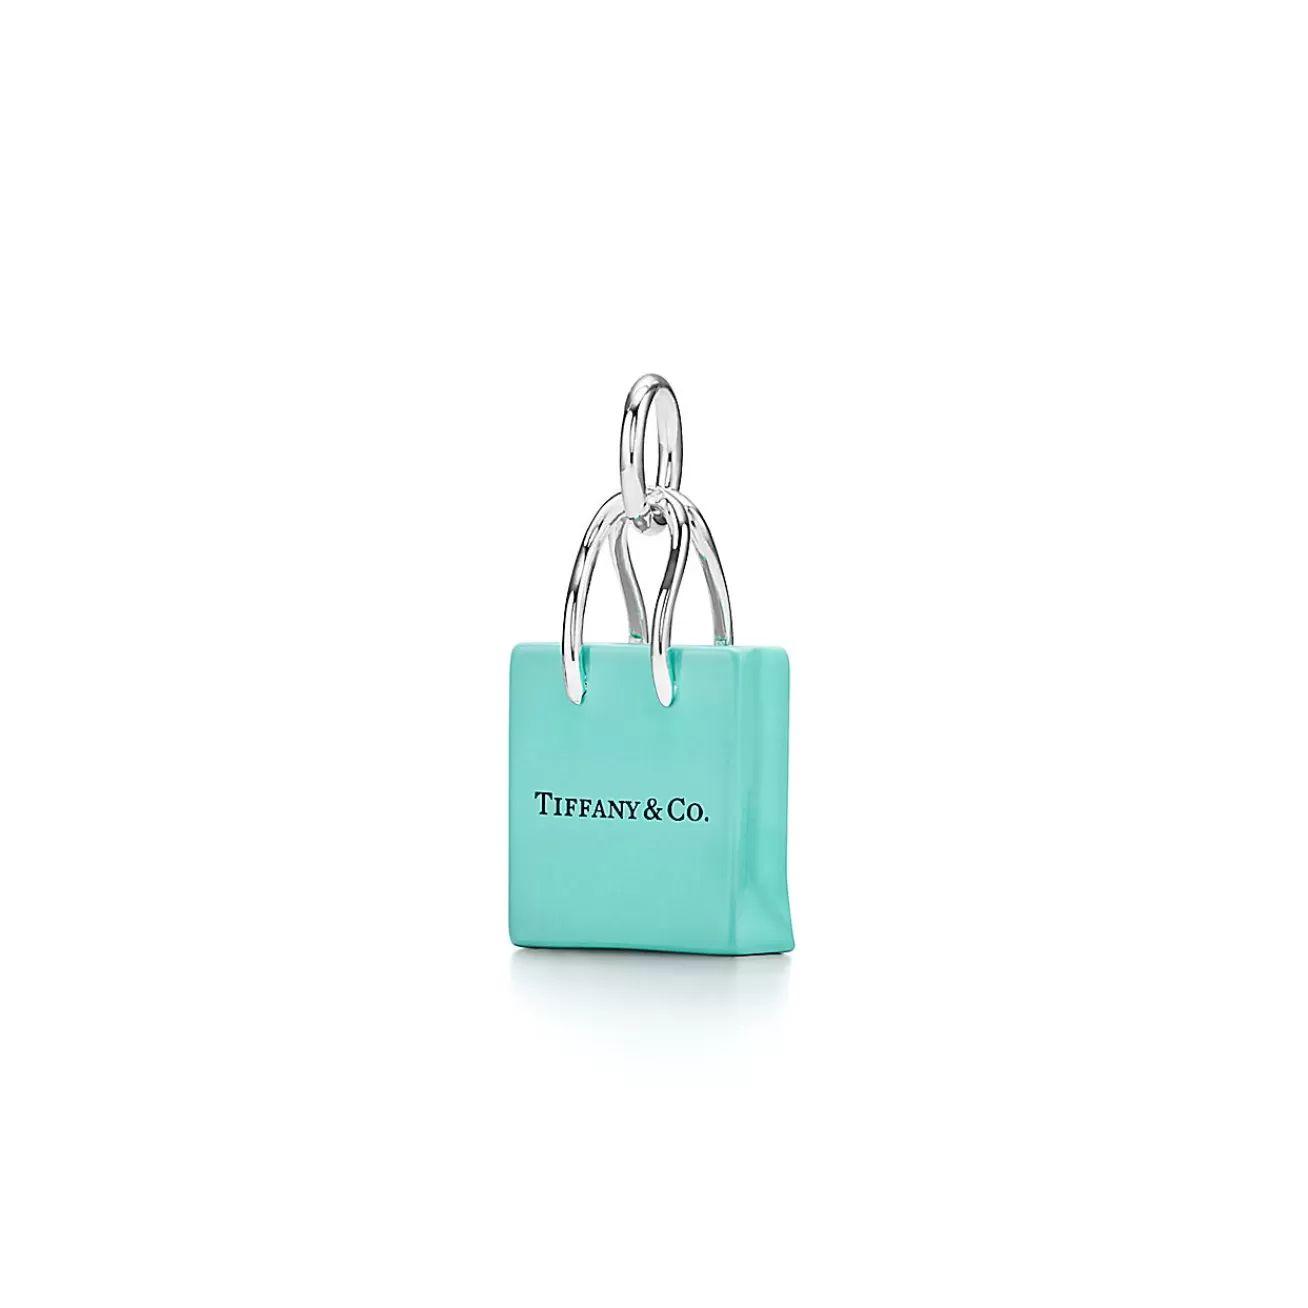 Tiffany & Co. ® shopping bag charm in sterling silver with enamel finish. | ^ Sterling Silver Jewelry | Tiffany Blue® Gifts